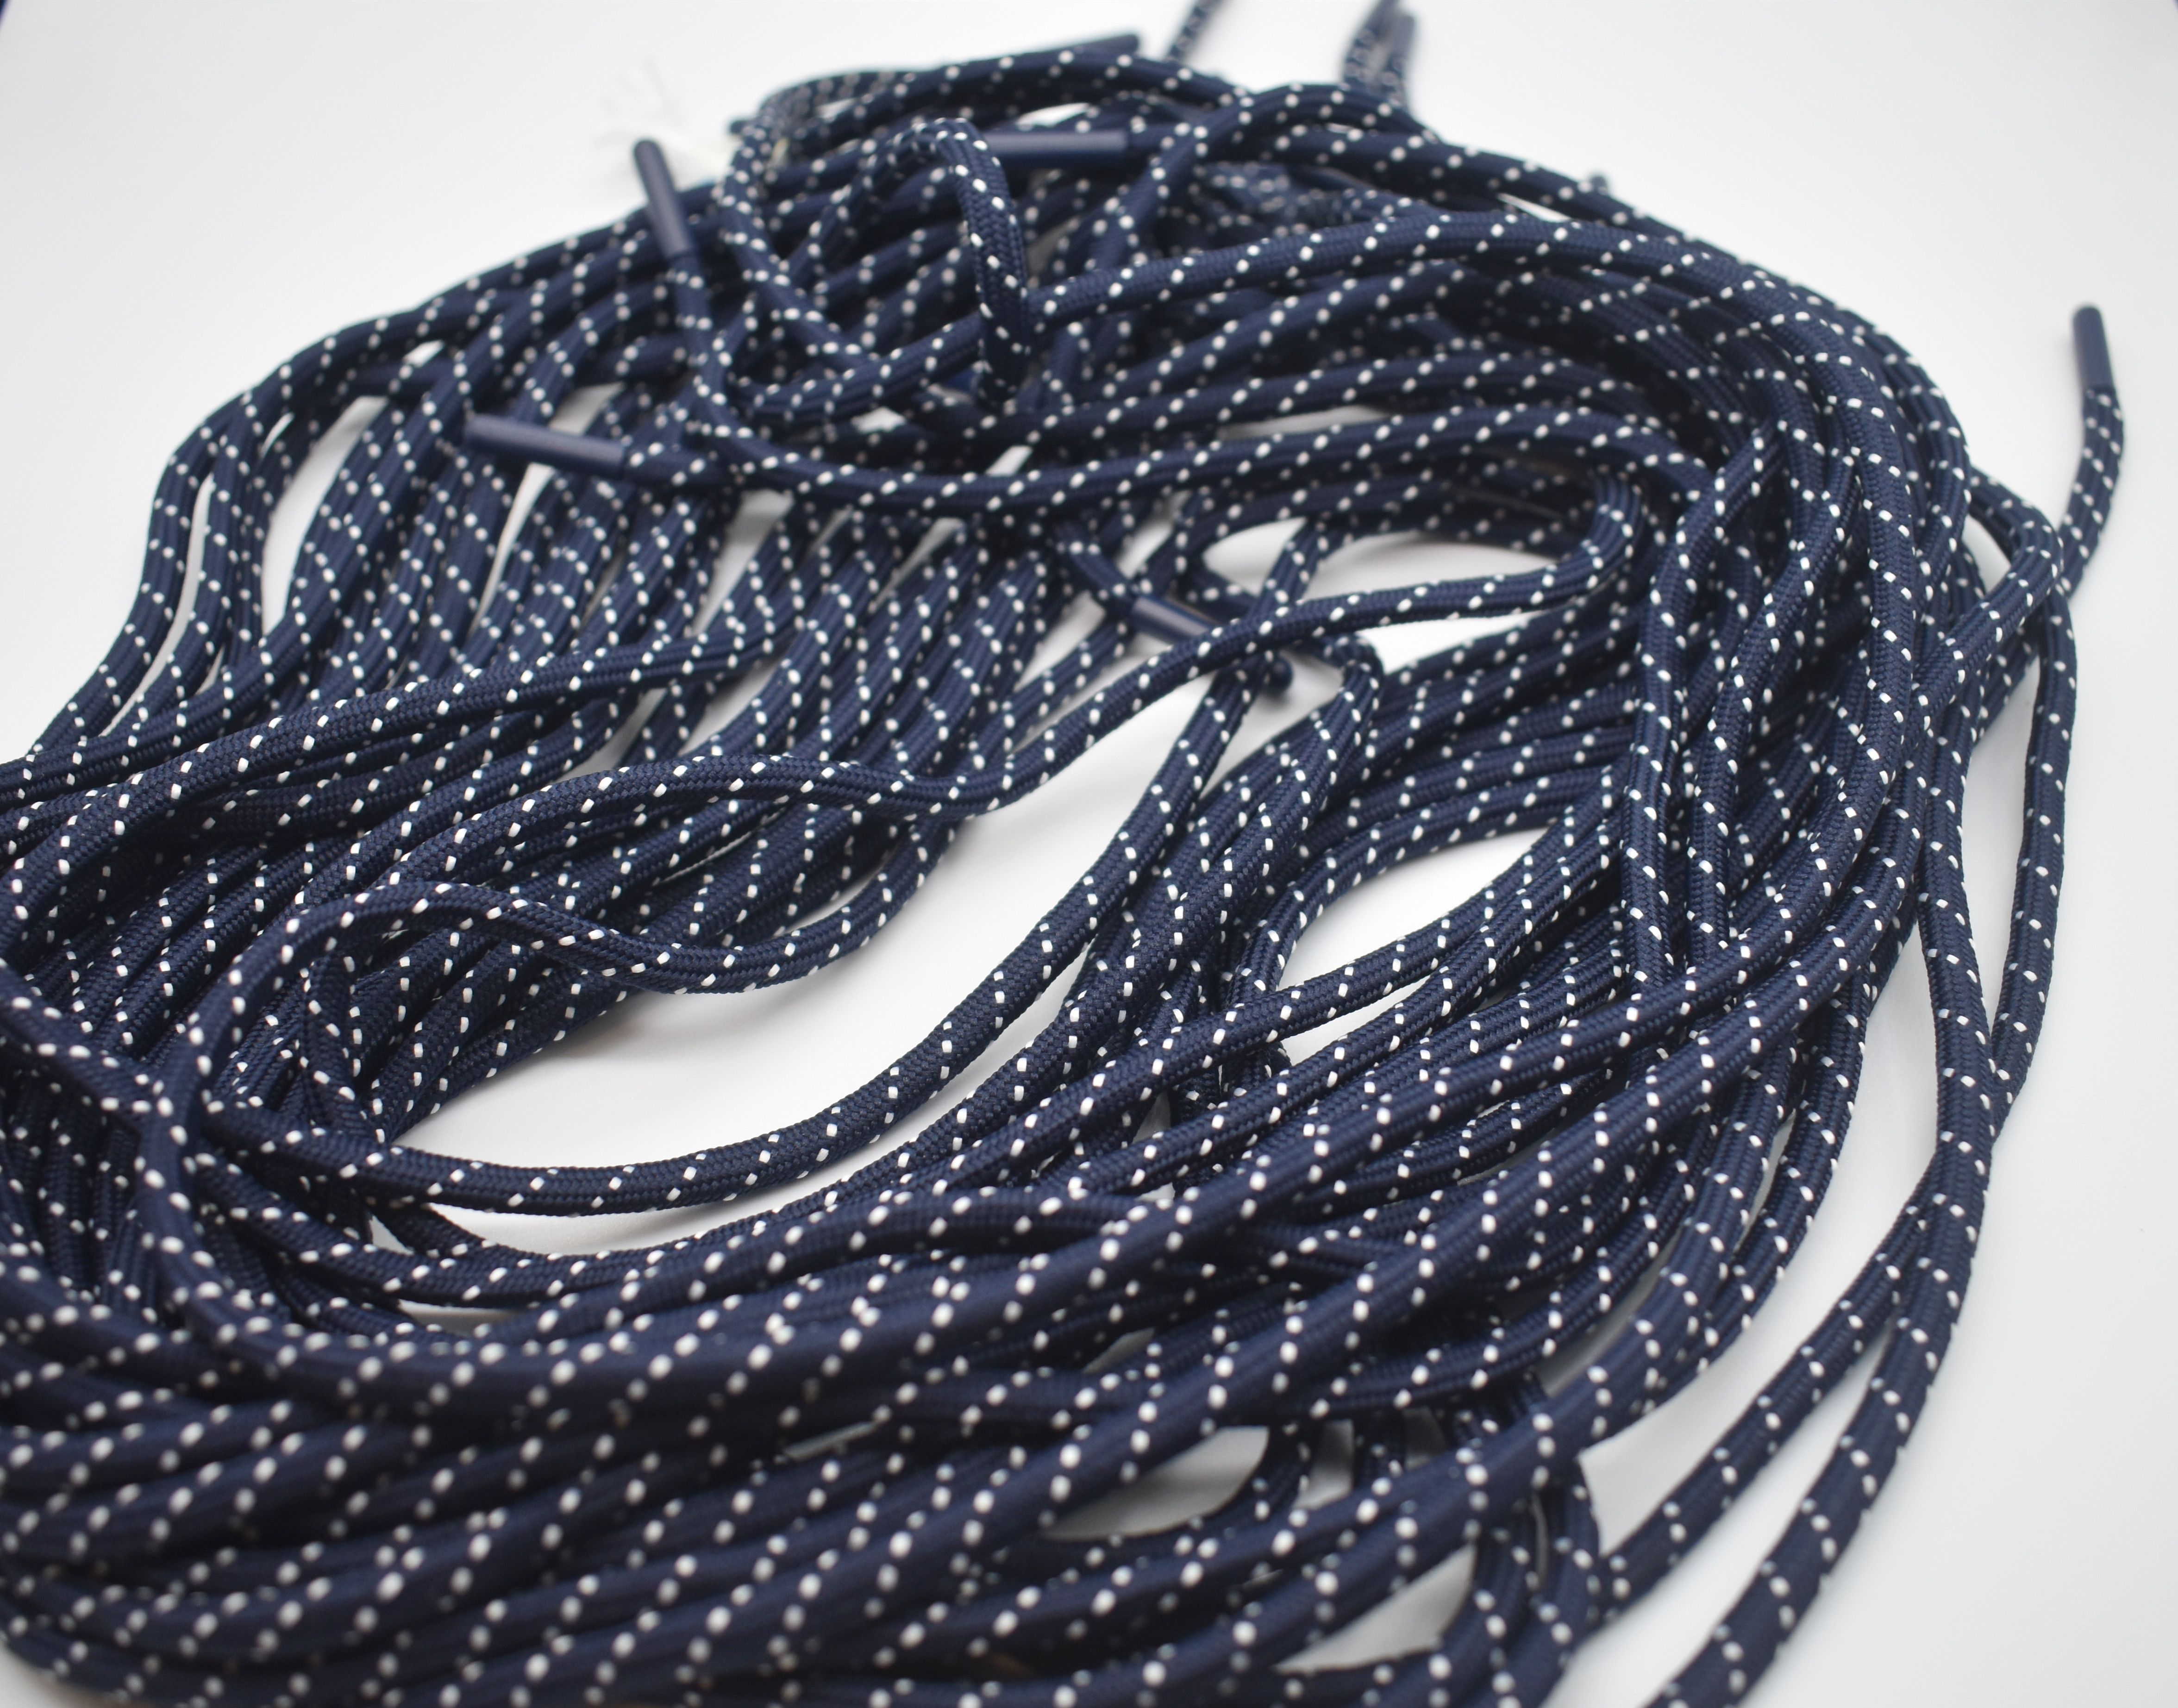  Polyester Flat Shoe Laces Round Reflective Dot With Enamel Finished DTM Aglet Manufactures